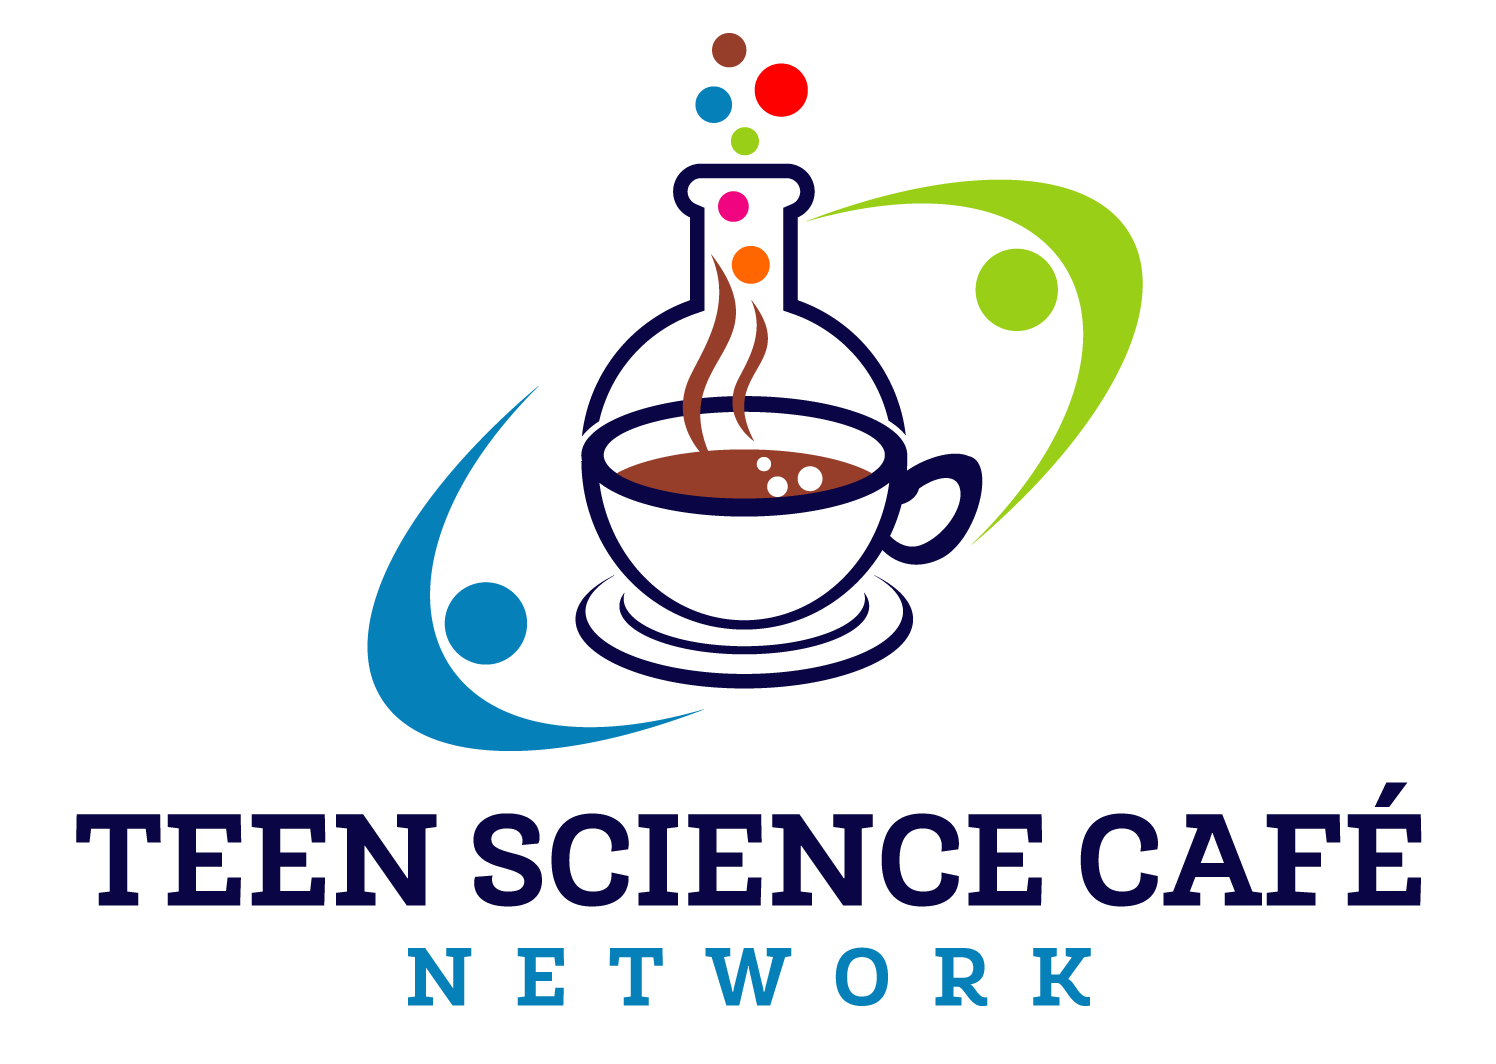 Teen Science Cafe Network image